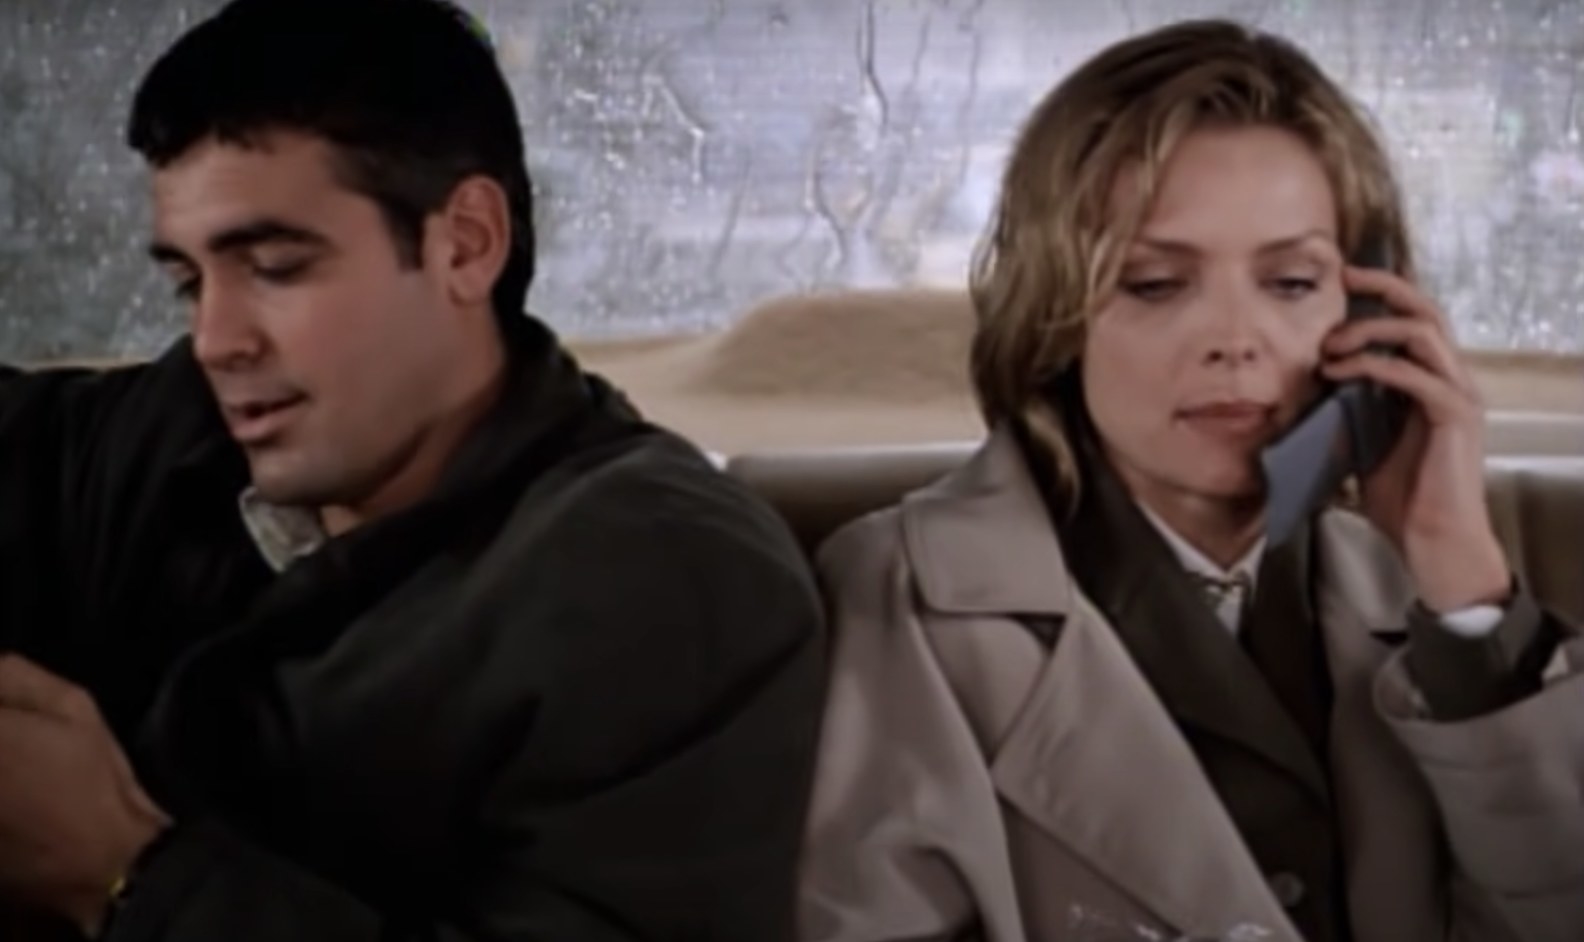 Actors George Clooney sits next to Michelle Pfeiffer in a taxi while she talks on the phone.